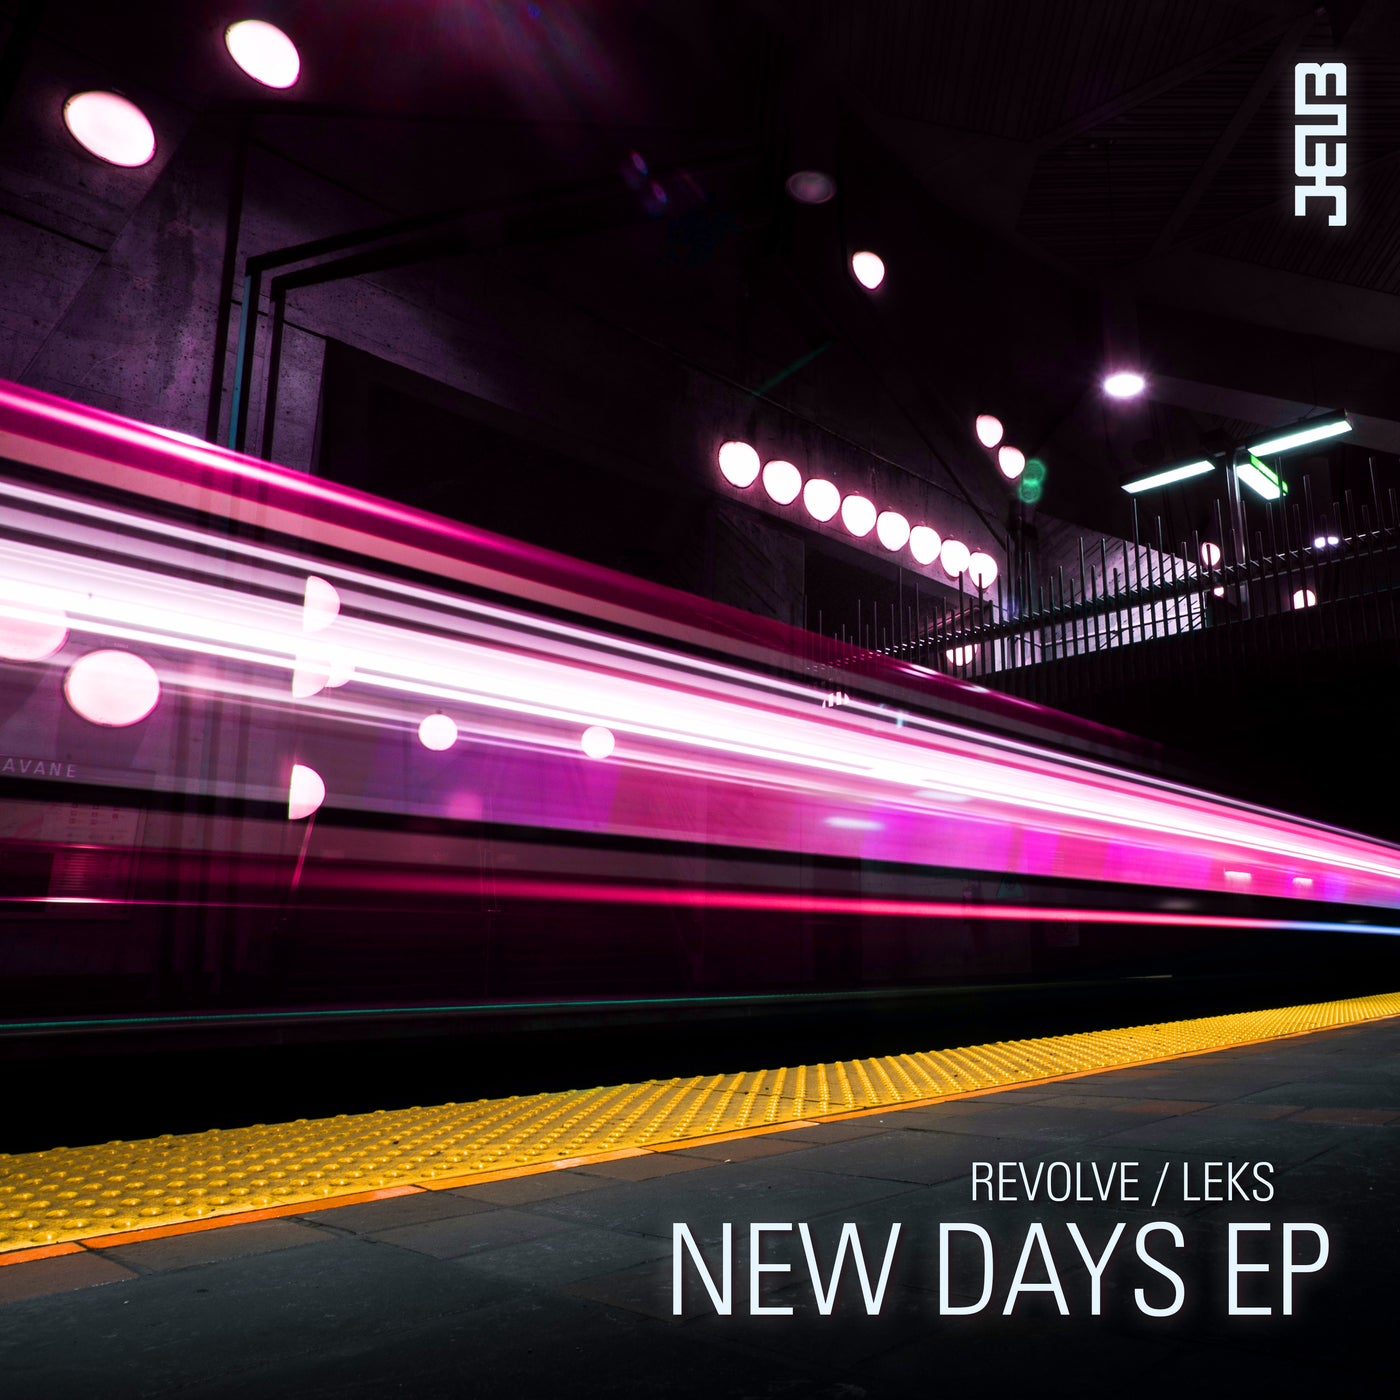 New Days EP